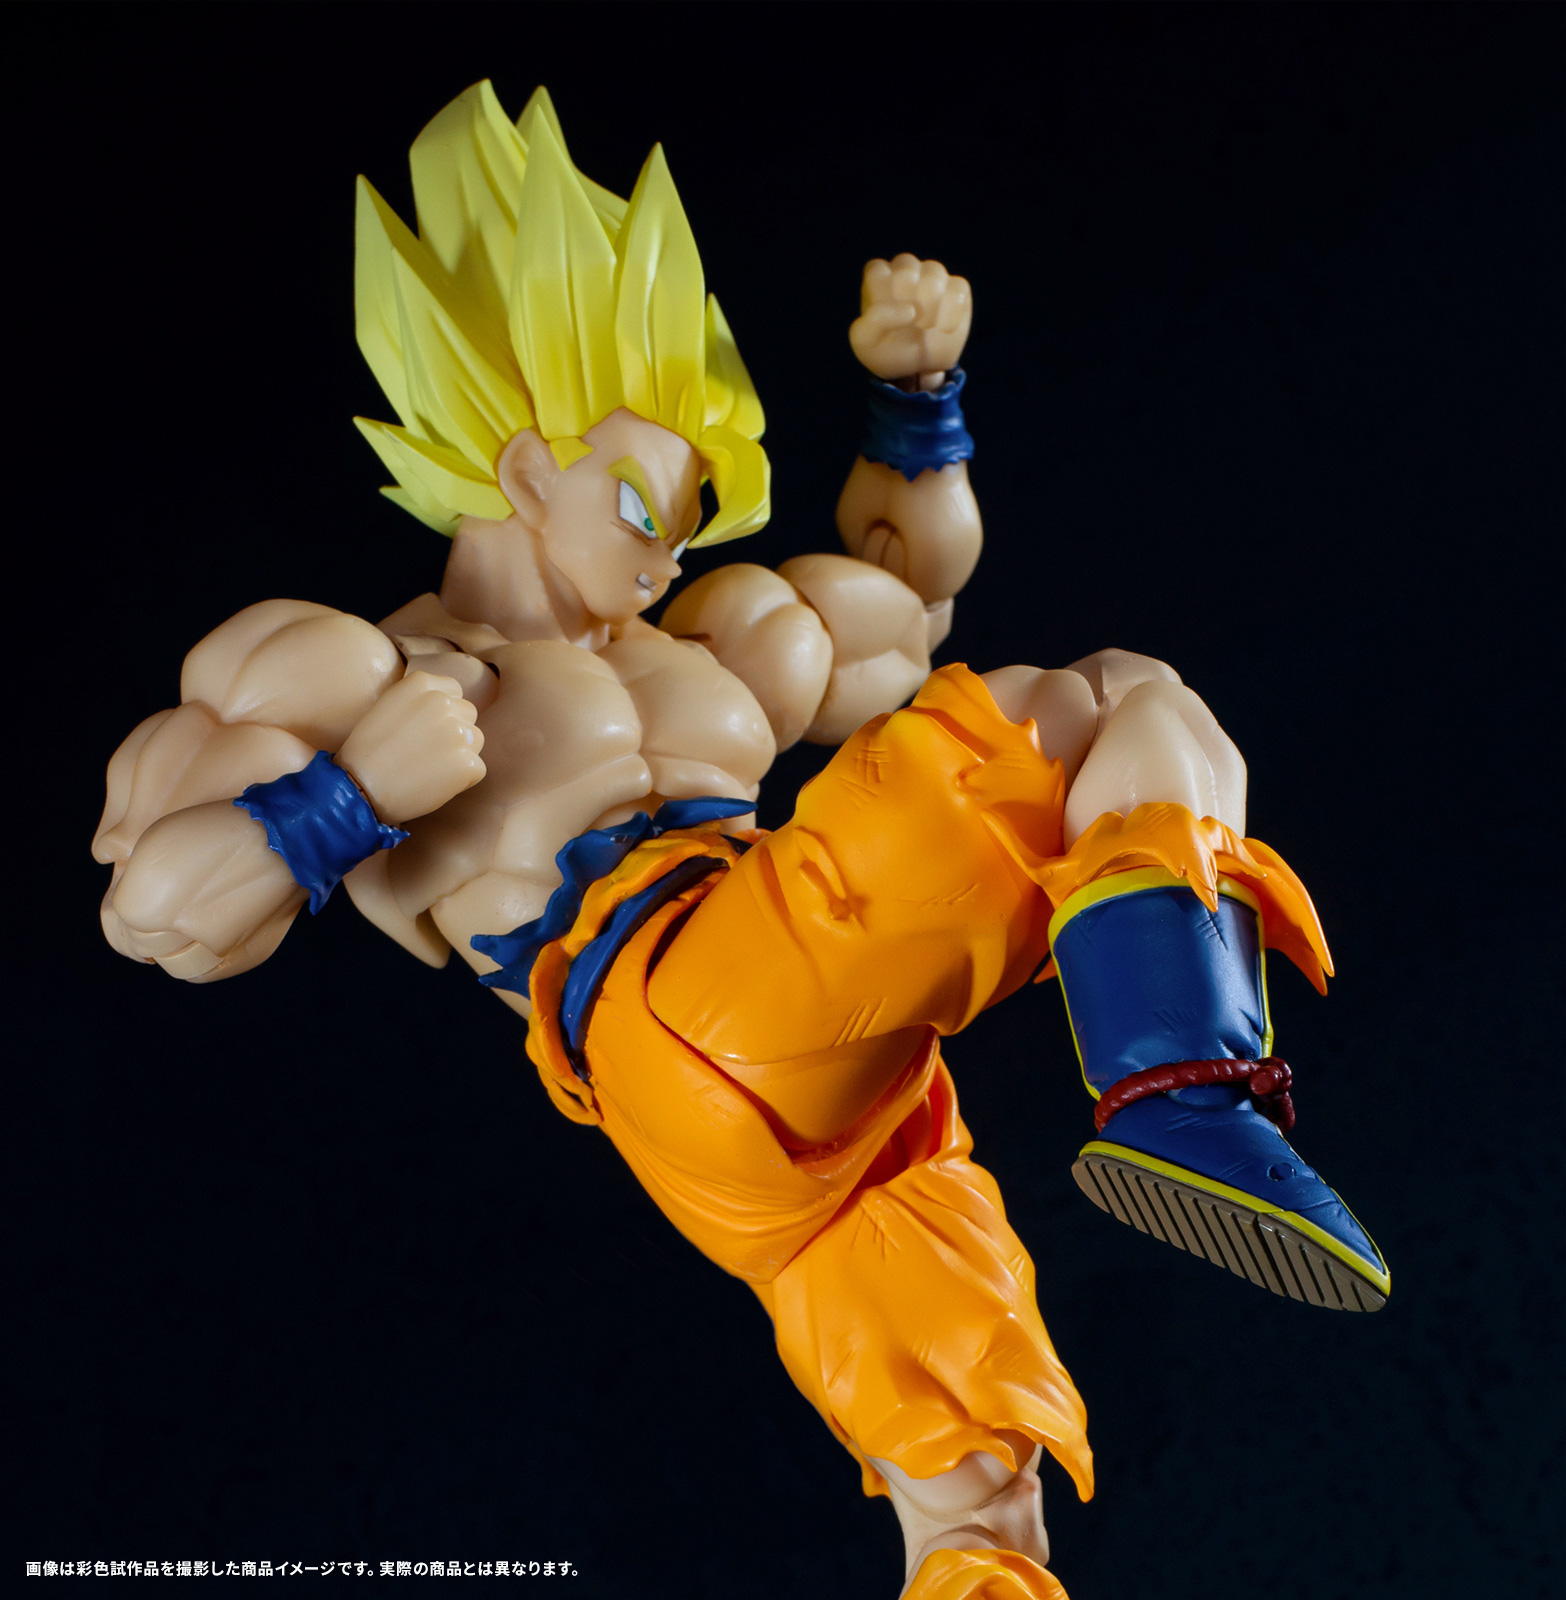 Completely new modeling! Introduction of &quot;S.H.Figuarts SUPER SAIYAN SON GOKU -LEGENDARY SUPER SAIYAN-&quot; photography